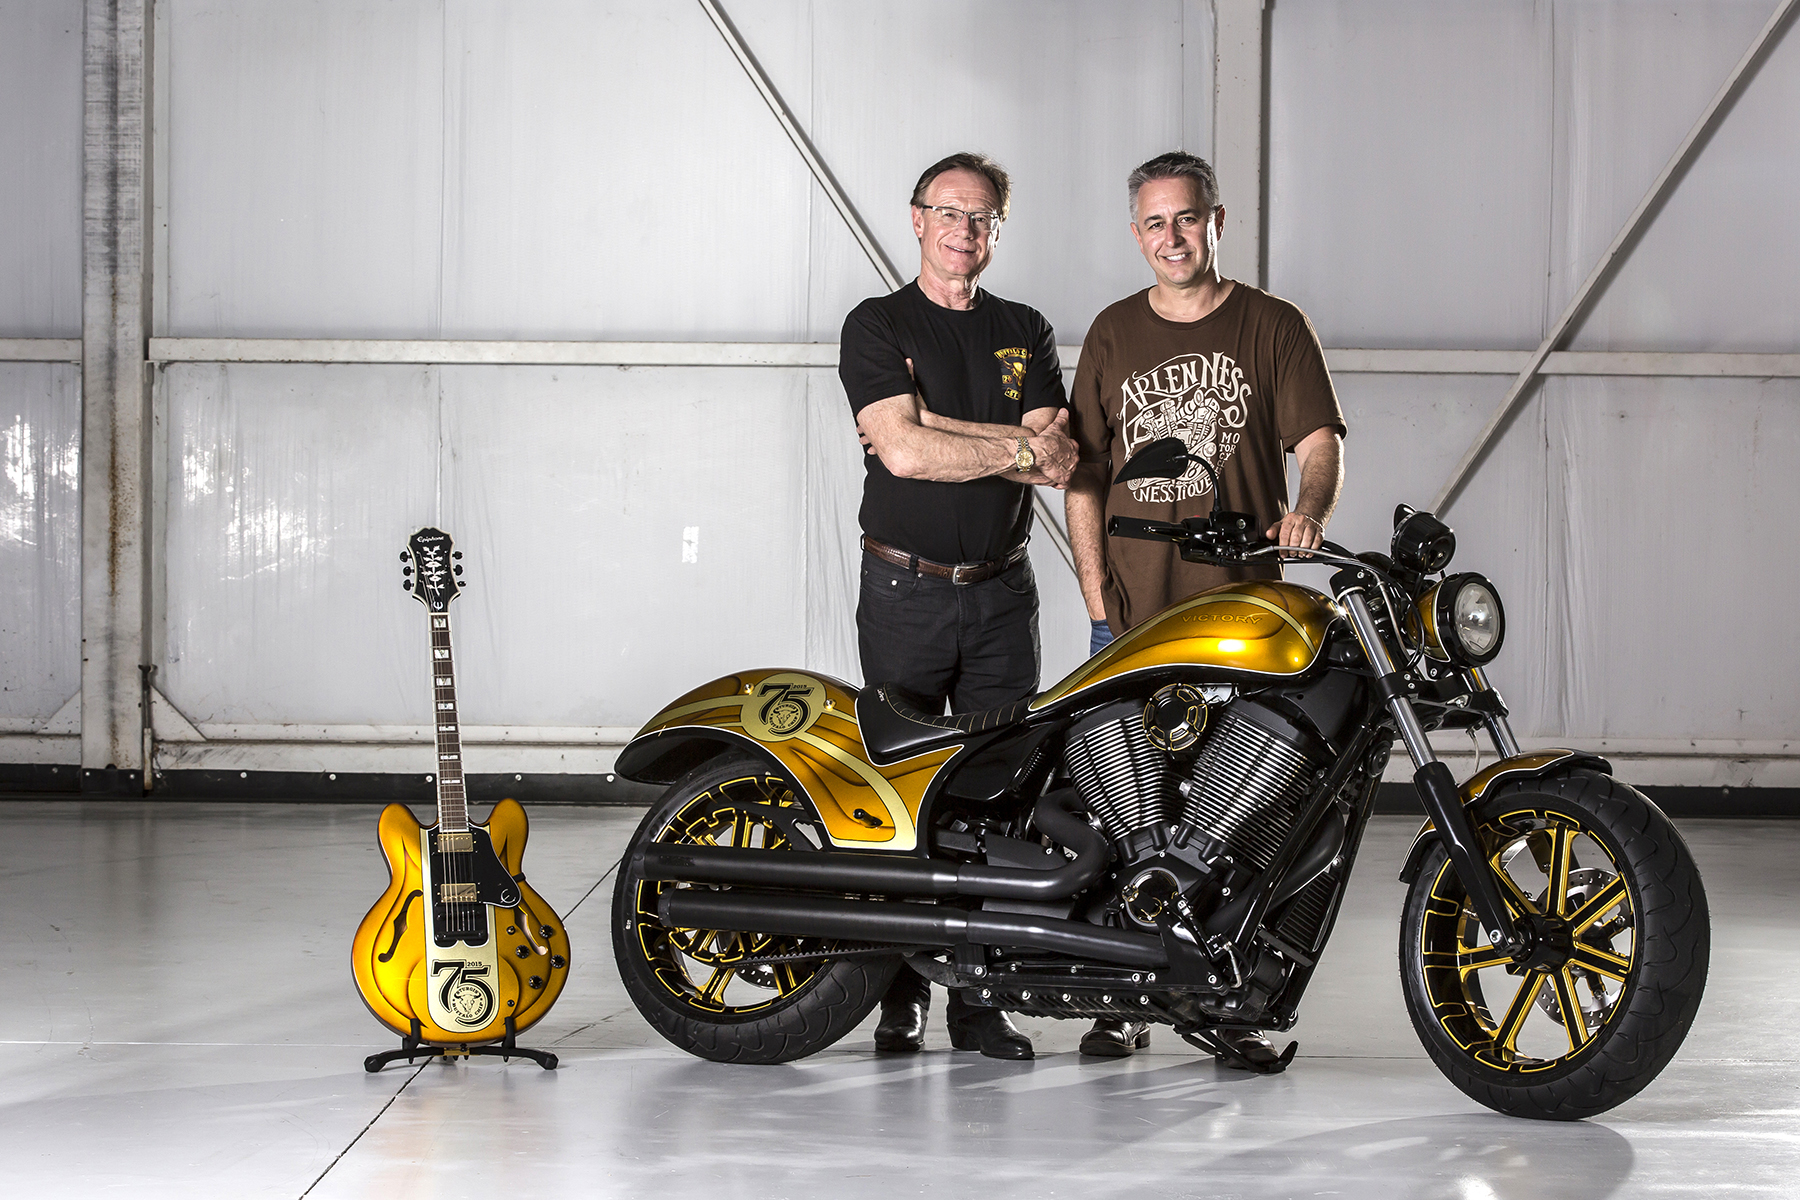 Buffalo Chip President, Rod Woodruff and premier bike customizer, Cory Ness show off the 2015 Sturgis Buffalo Chip's Sturgis Rider Sweepstakes prize package.